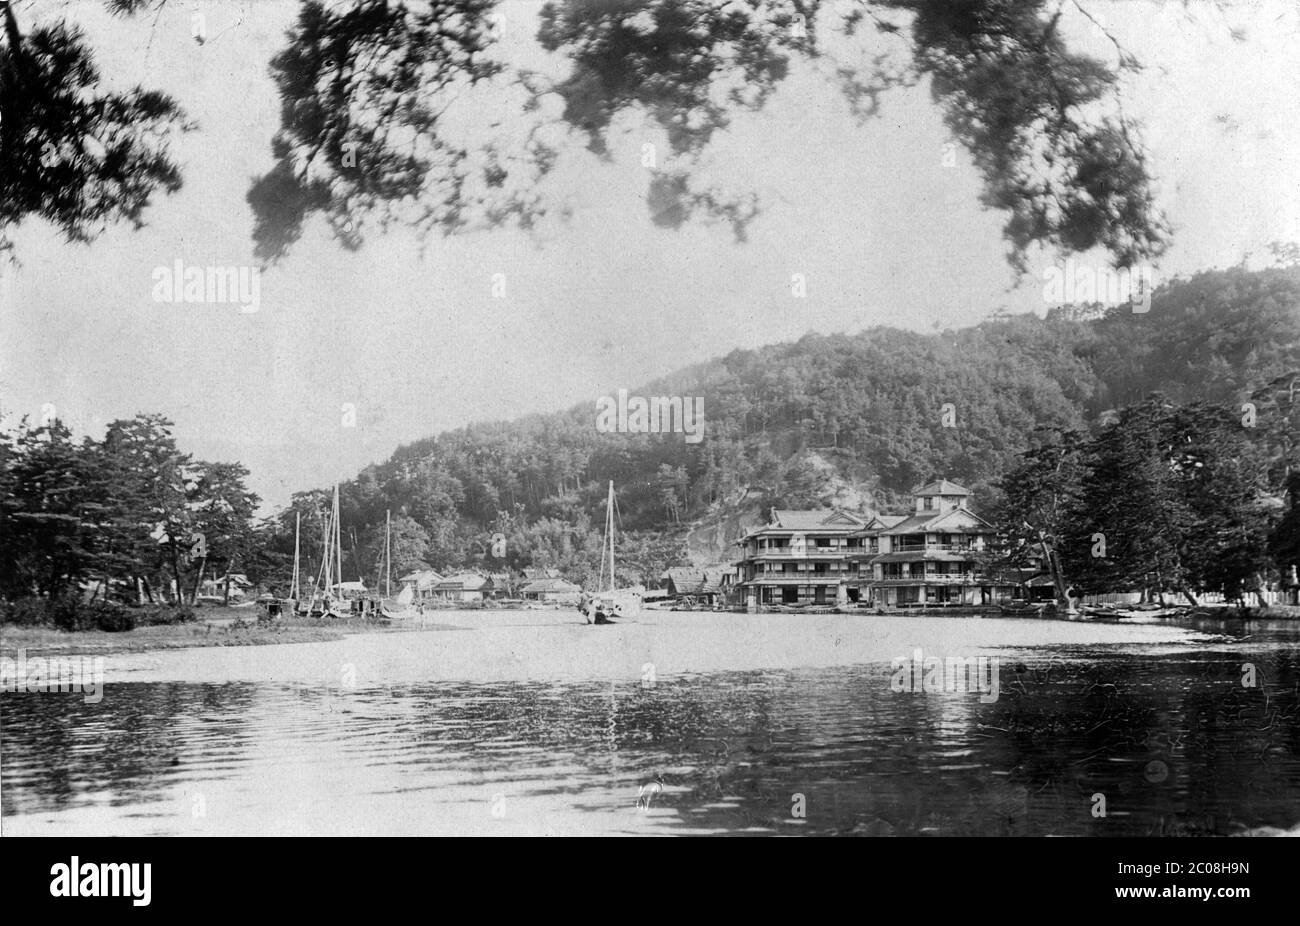 [ 1900s Japan - Miyazu, Kyoto ] — Monju Hotel in Miyazu, Kyoto Prefecture, early 1900s.  The trees on the protruding bit of land on the left are part of Amanohashidate, considered to be one of Japan's three most beautiful sights.  Hidden behind the trees on the right is the entrance gate of Chionji Temple.  In 1923 (Taisho 12) the Kaisenbashi bridge was built at this spot to connect Amanohashidate with the mainland.  20th century vintage gelatin silver print. Stock Photo